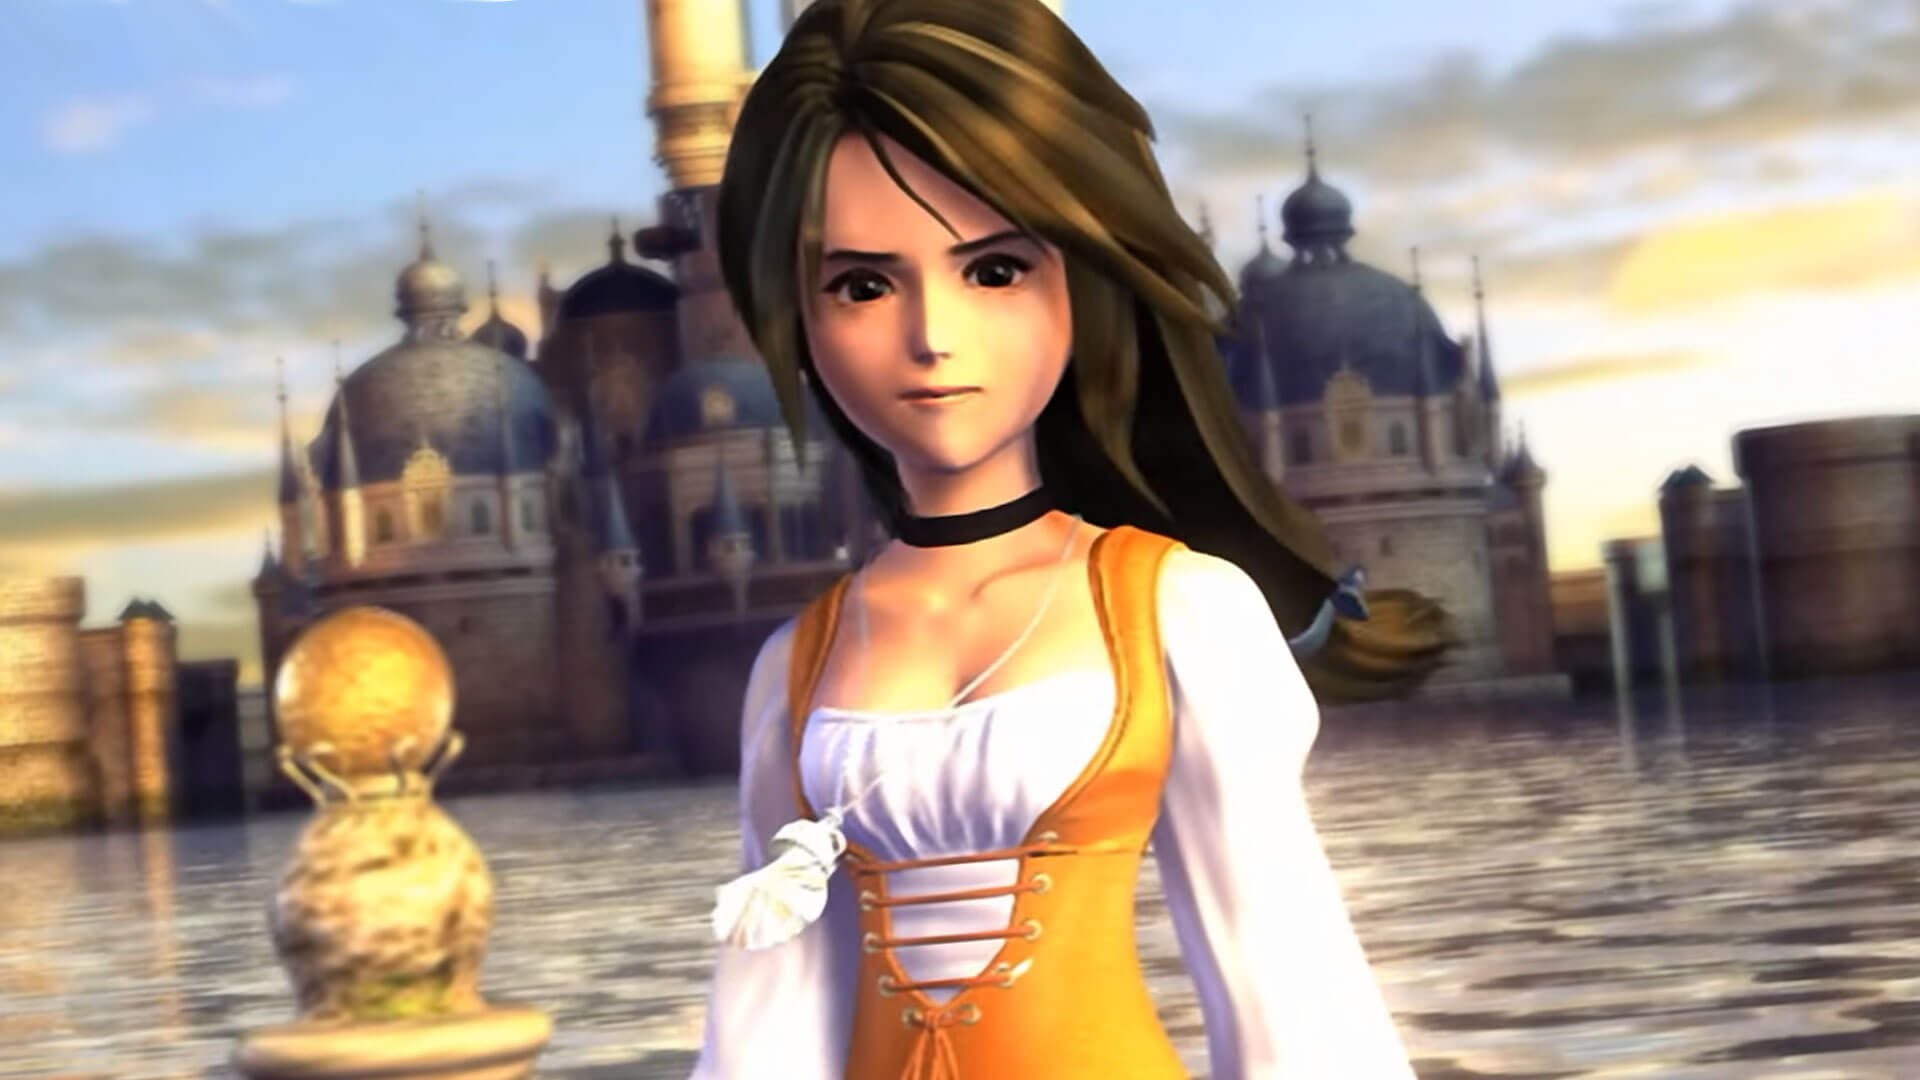 1920x1080 Final Fantasy IX Is Available Now for PlayStation 4 in North America and  Europe